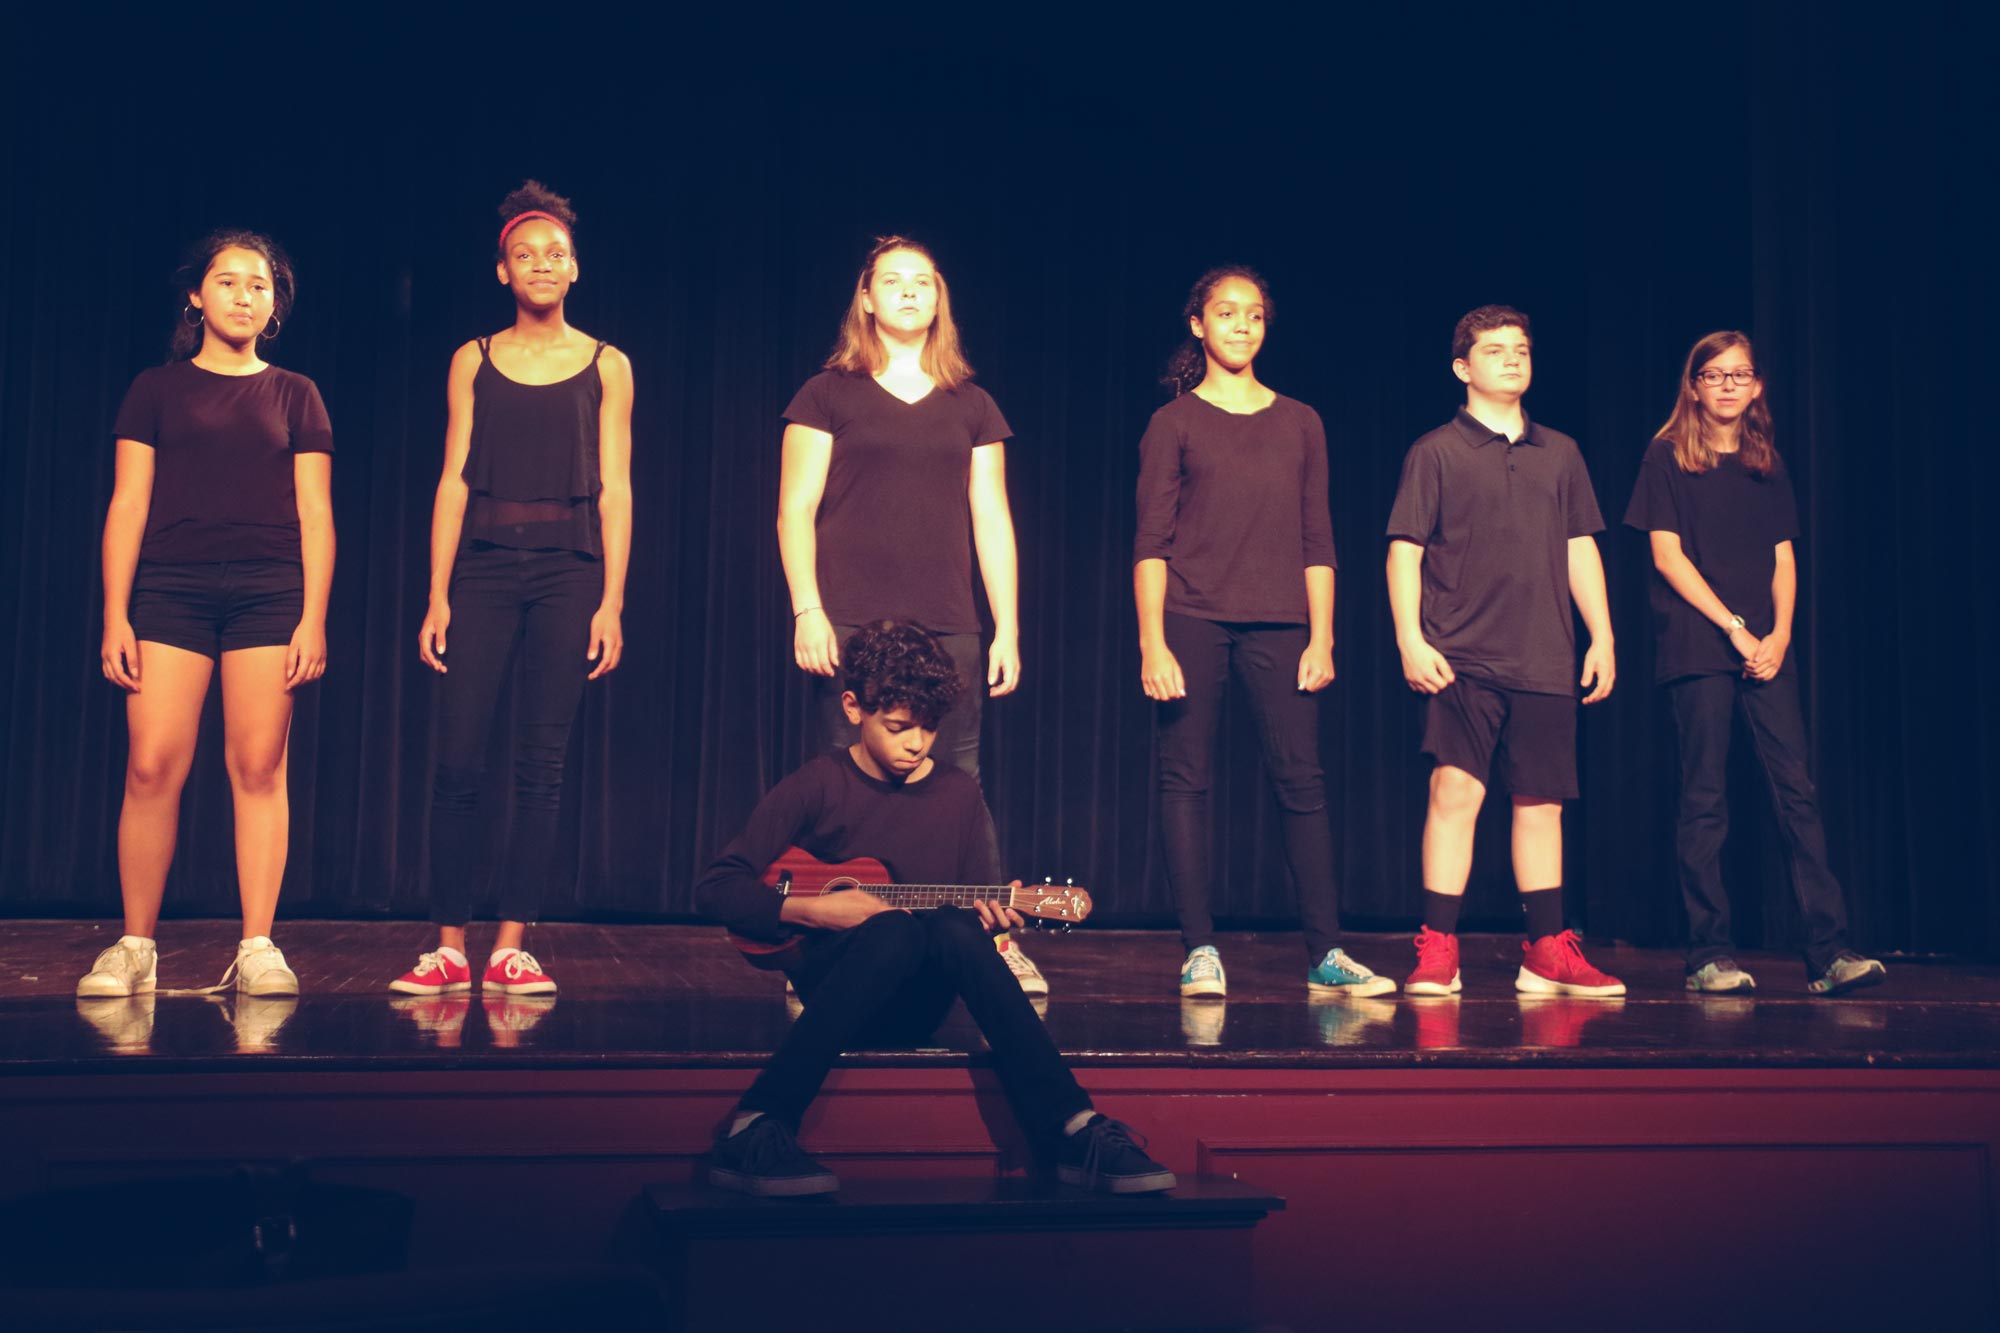 Students stand behind one student who is sitting off the edge of the stage playing a guitar during a play